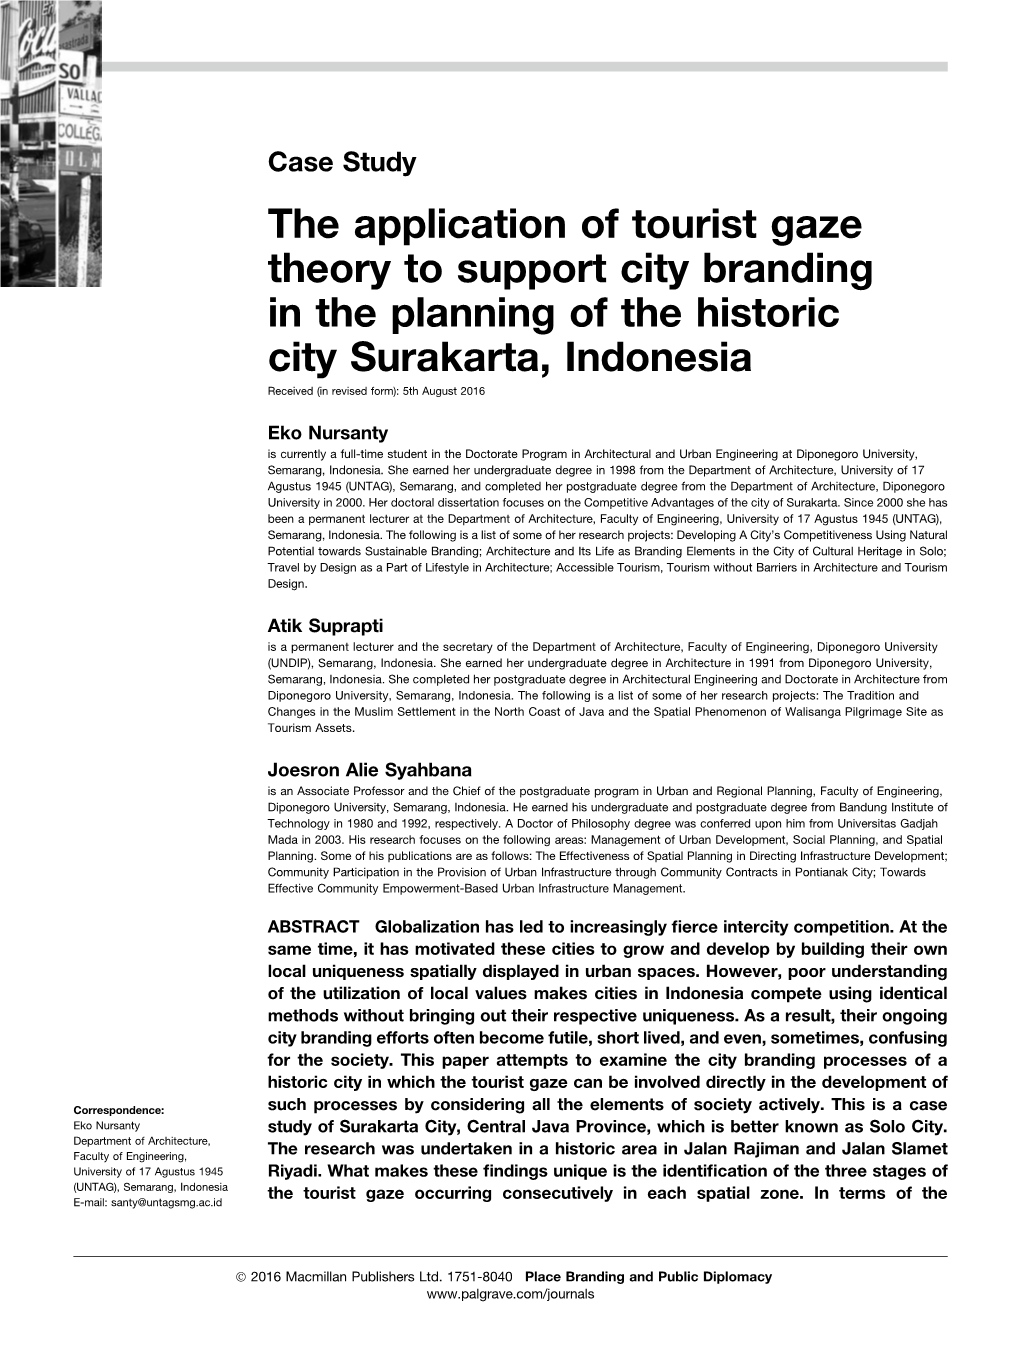 The Application of Tourist Gaze Theory to Support City Branding in the Planning of the Historic City Surakarta, Indonesia Received (In Revised Form): 5Th August 2016